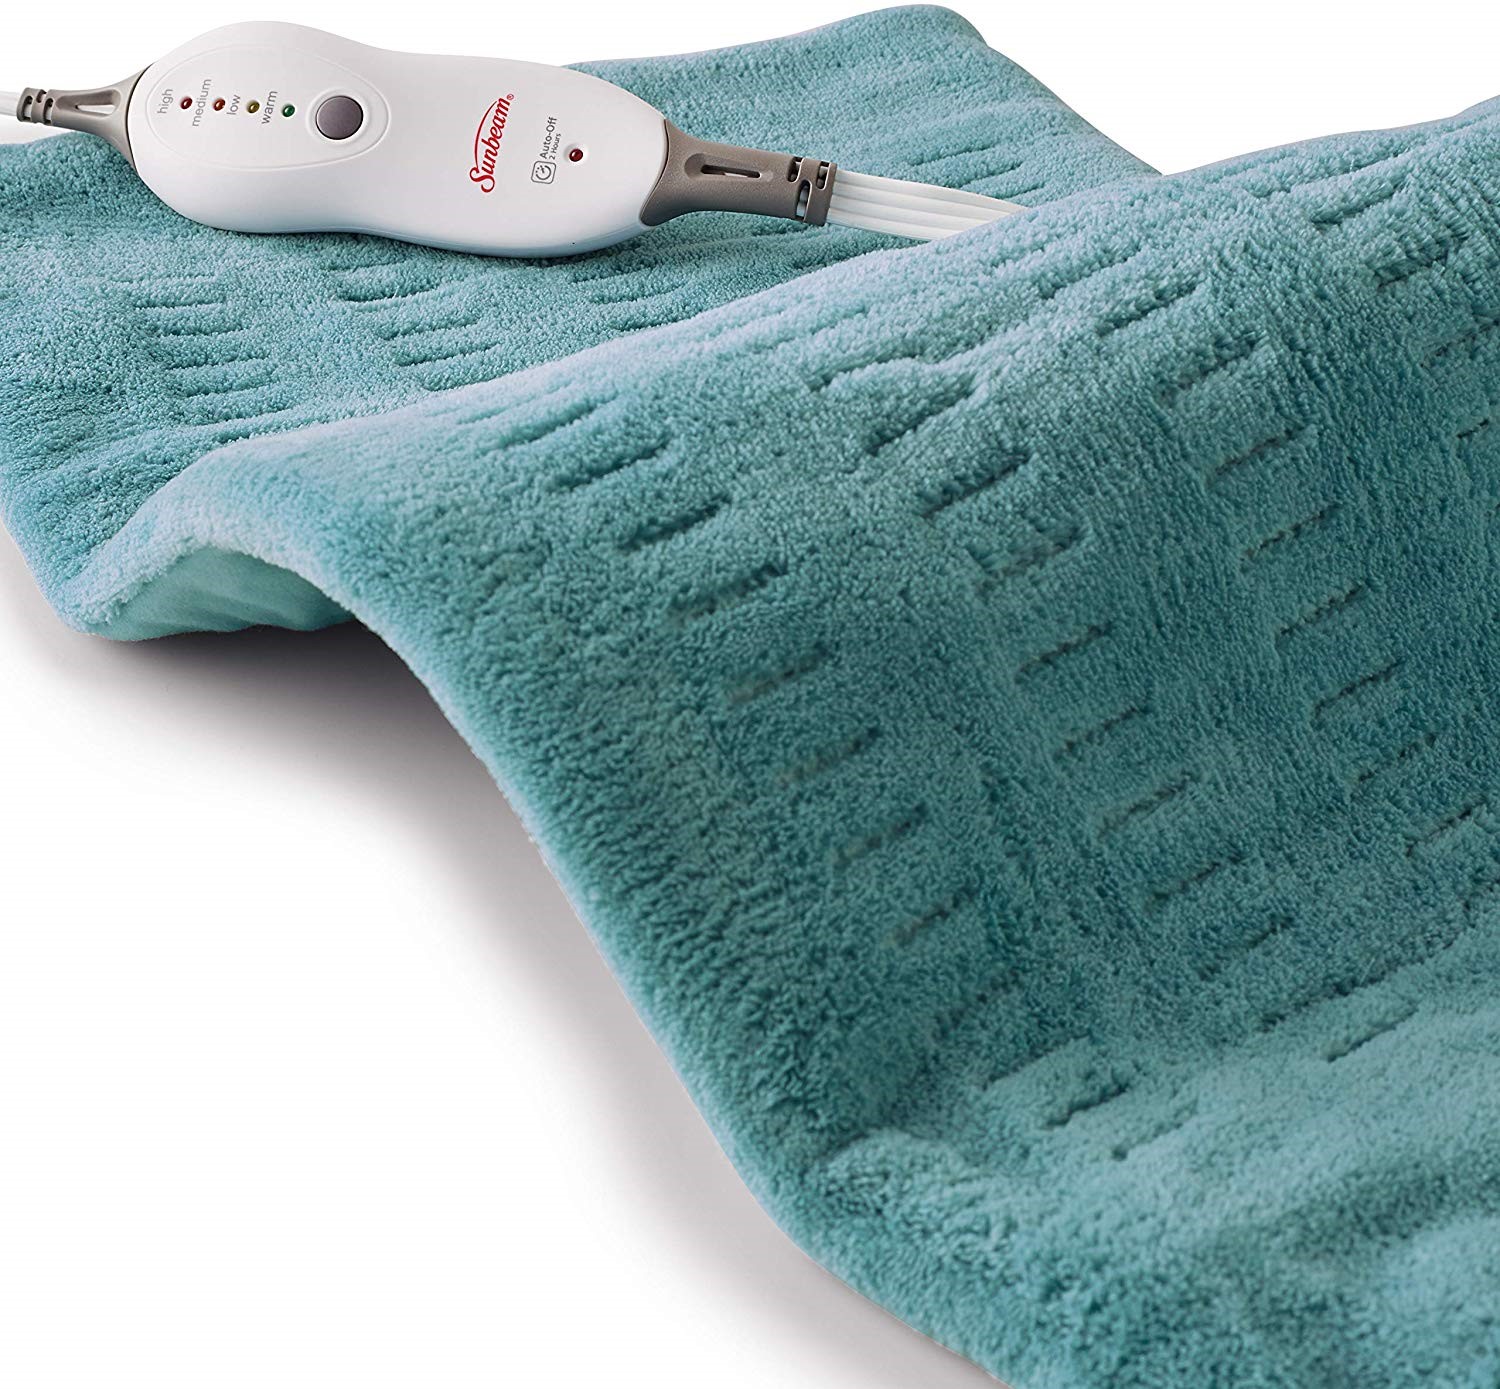 Extra-large heating pad for endometriosis pain relief.